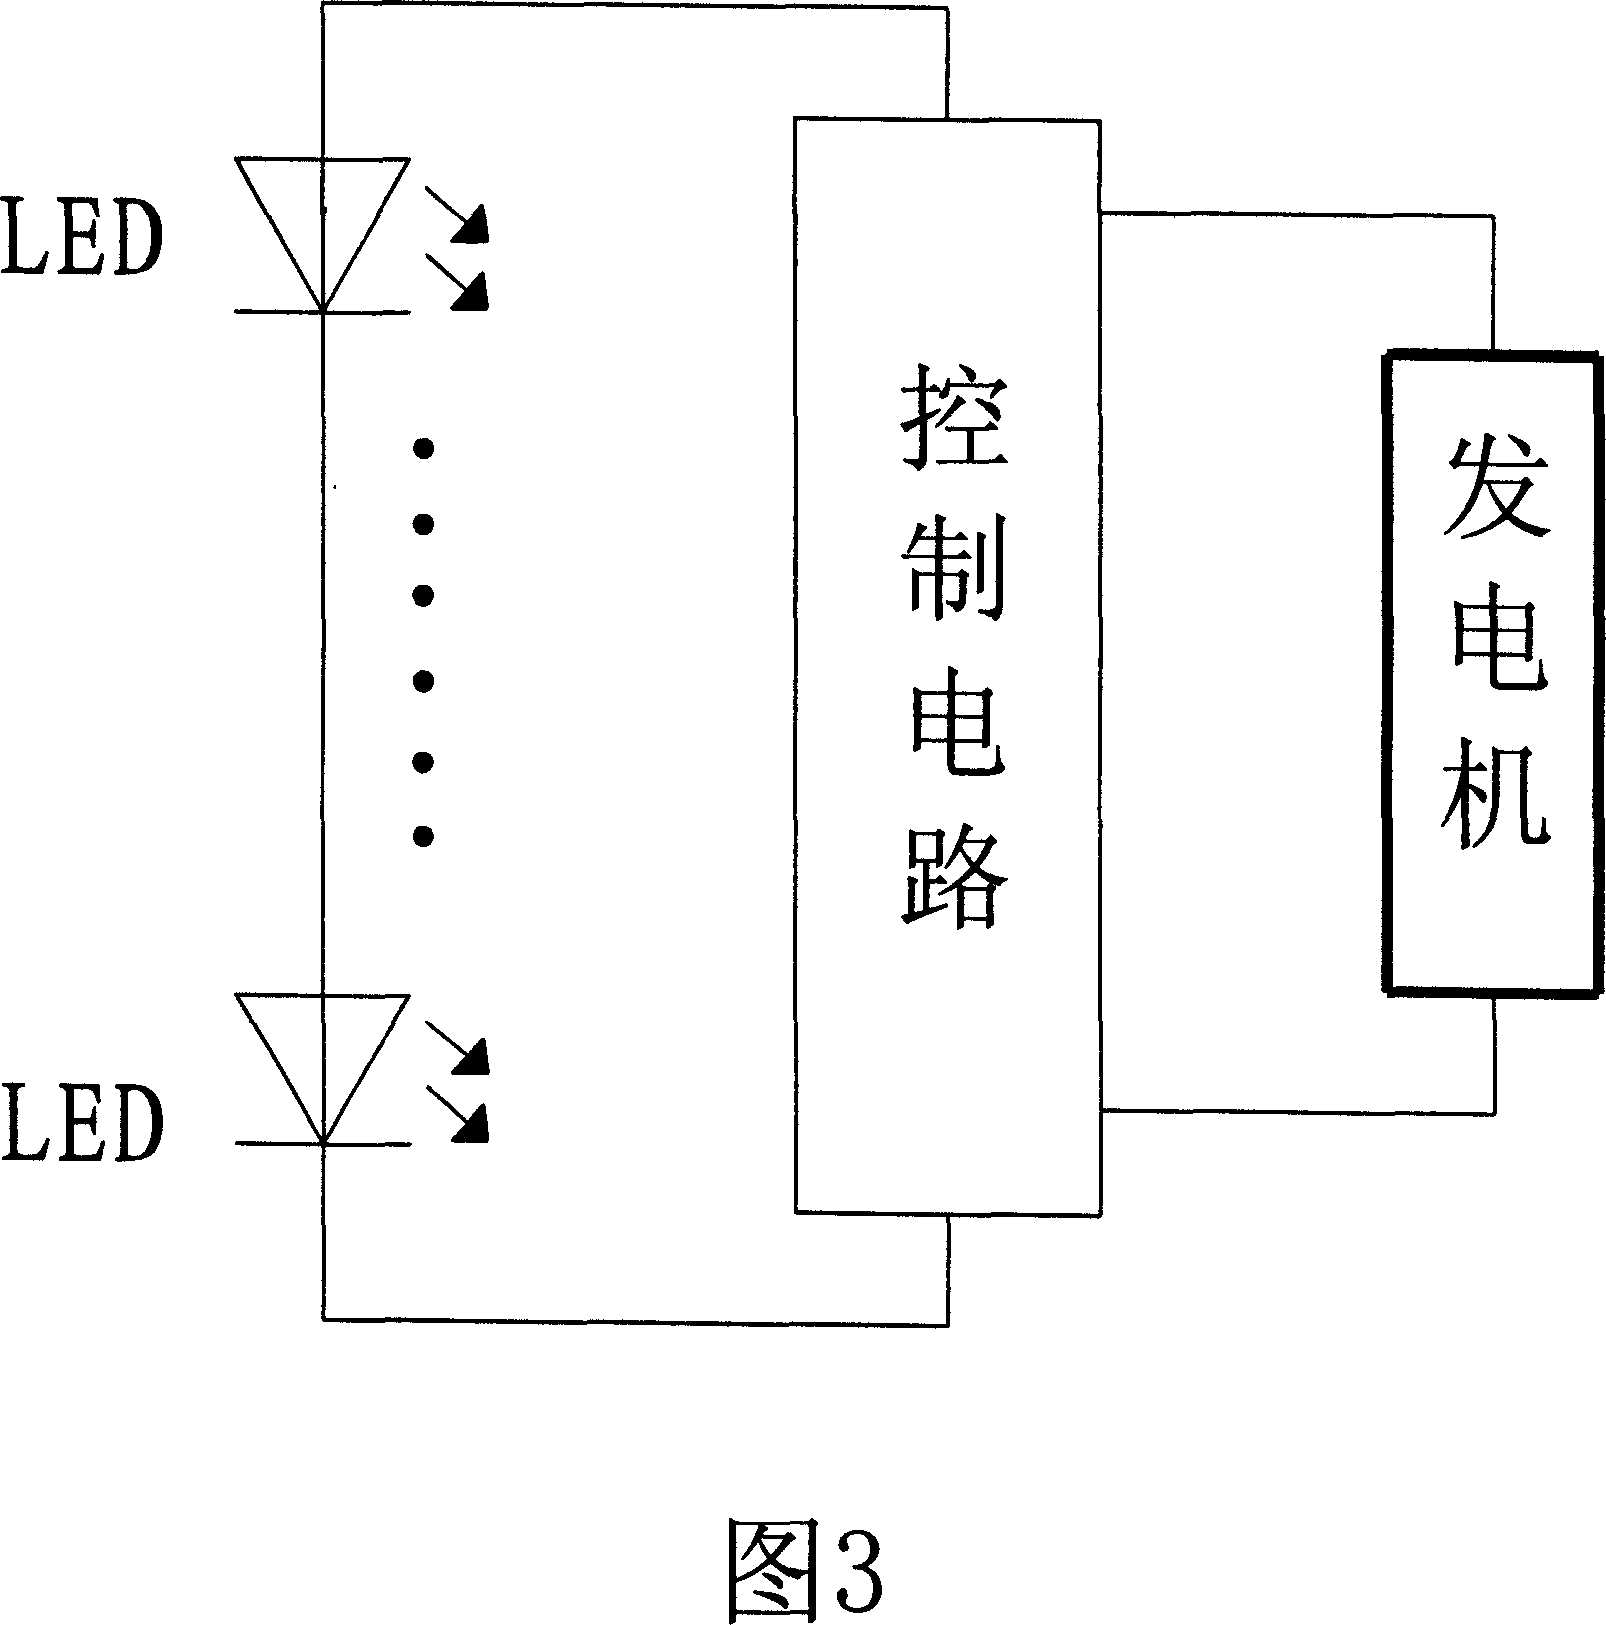 Nozzle for water flow electricity generation to drive LED